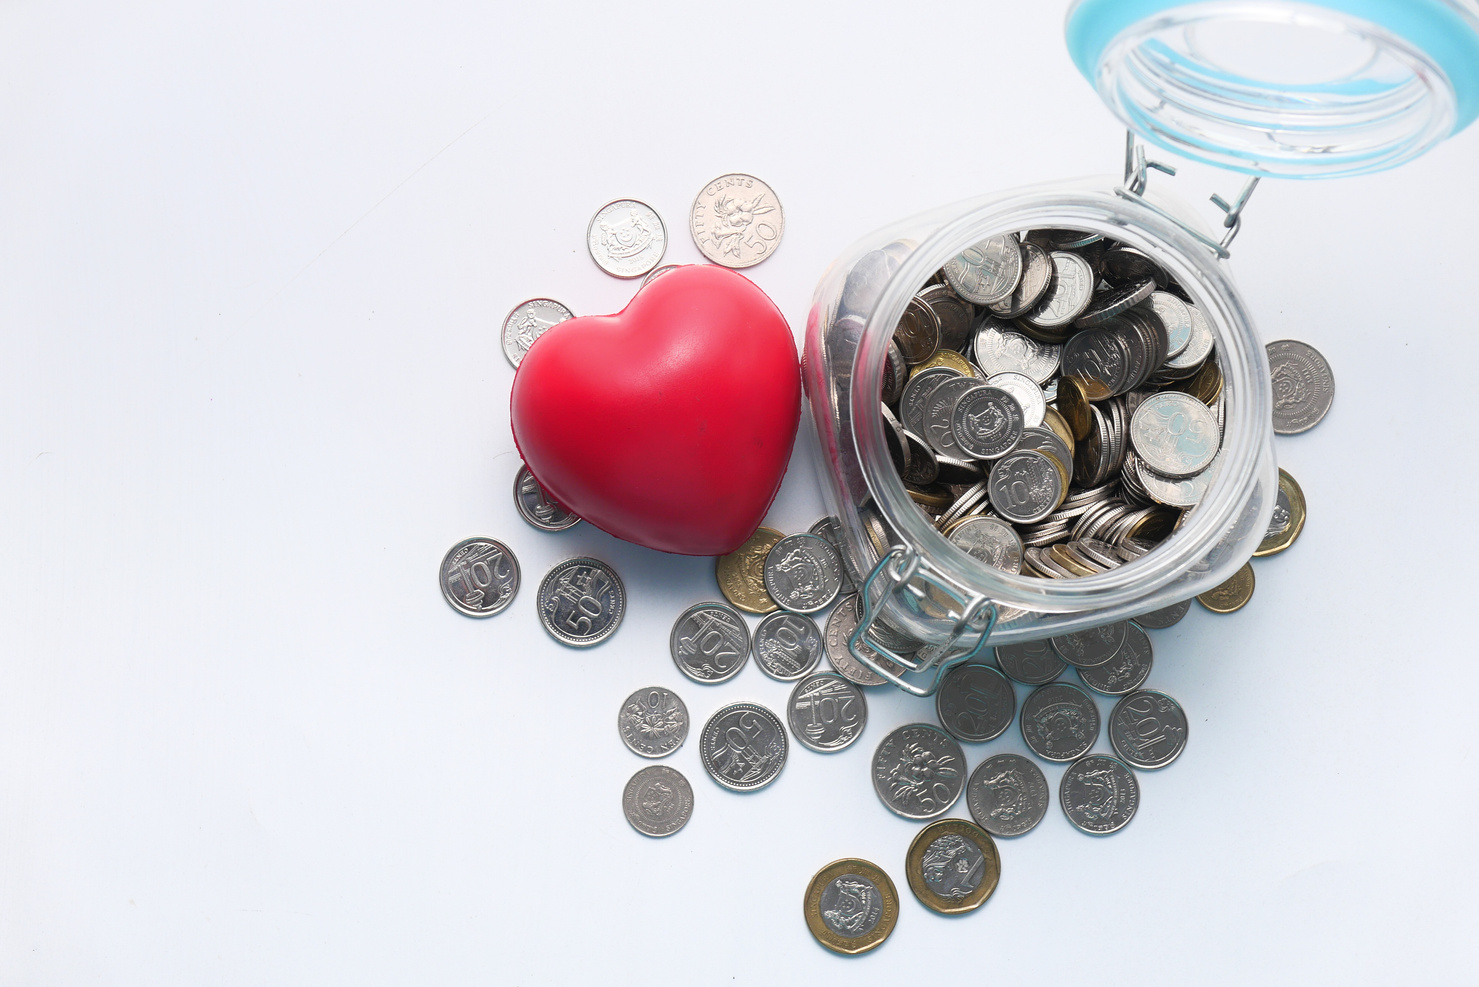 Red Heart and Coins in a Jar on White Background